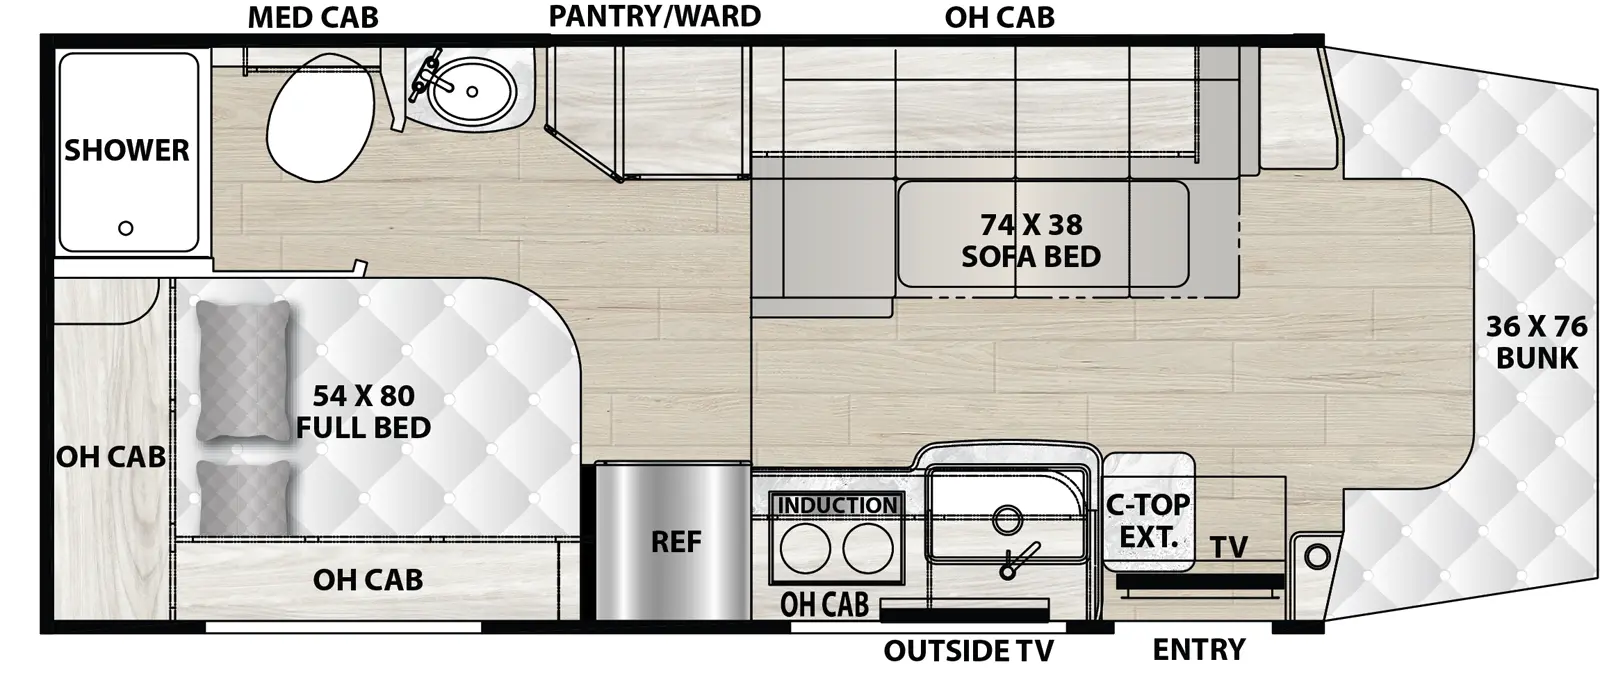 The 24FL has zero slideouts and one entry. Exterior features an outside TV. Interior layout front to back: bunk over cab, off-door side sofa bed with overhead cabinet, and pantry/wardrobe; door side entry with TV above, kitchen counter with sink, countertop extension, overhead cabinet, induction cooktop, and refrigerator; rear off-door side bathroom sink and room with toilet, shower and medicine cabinet; rear door side full bed with overhead cabinets.